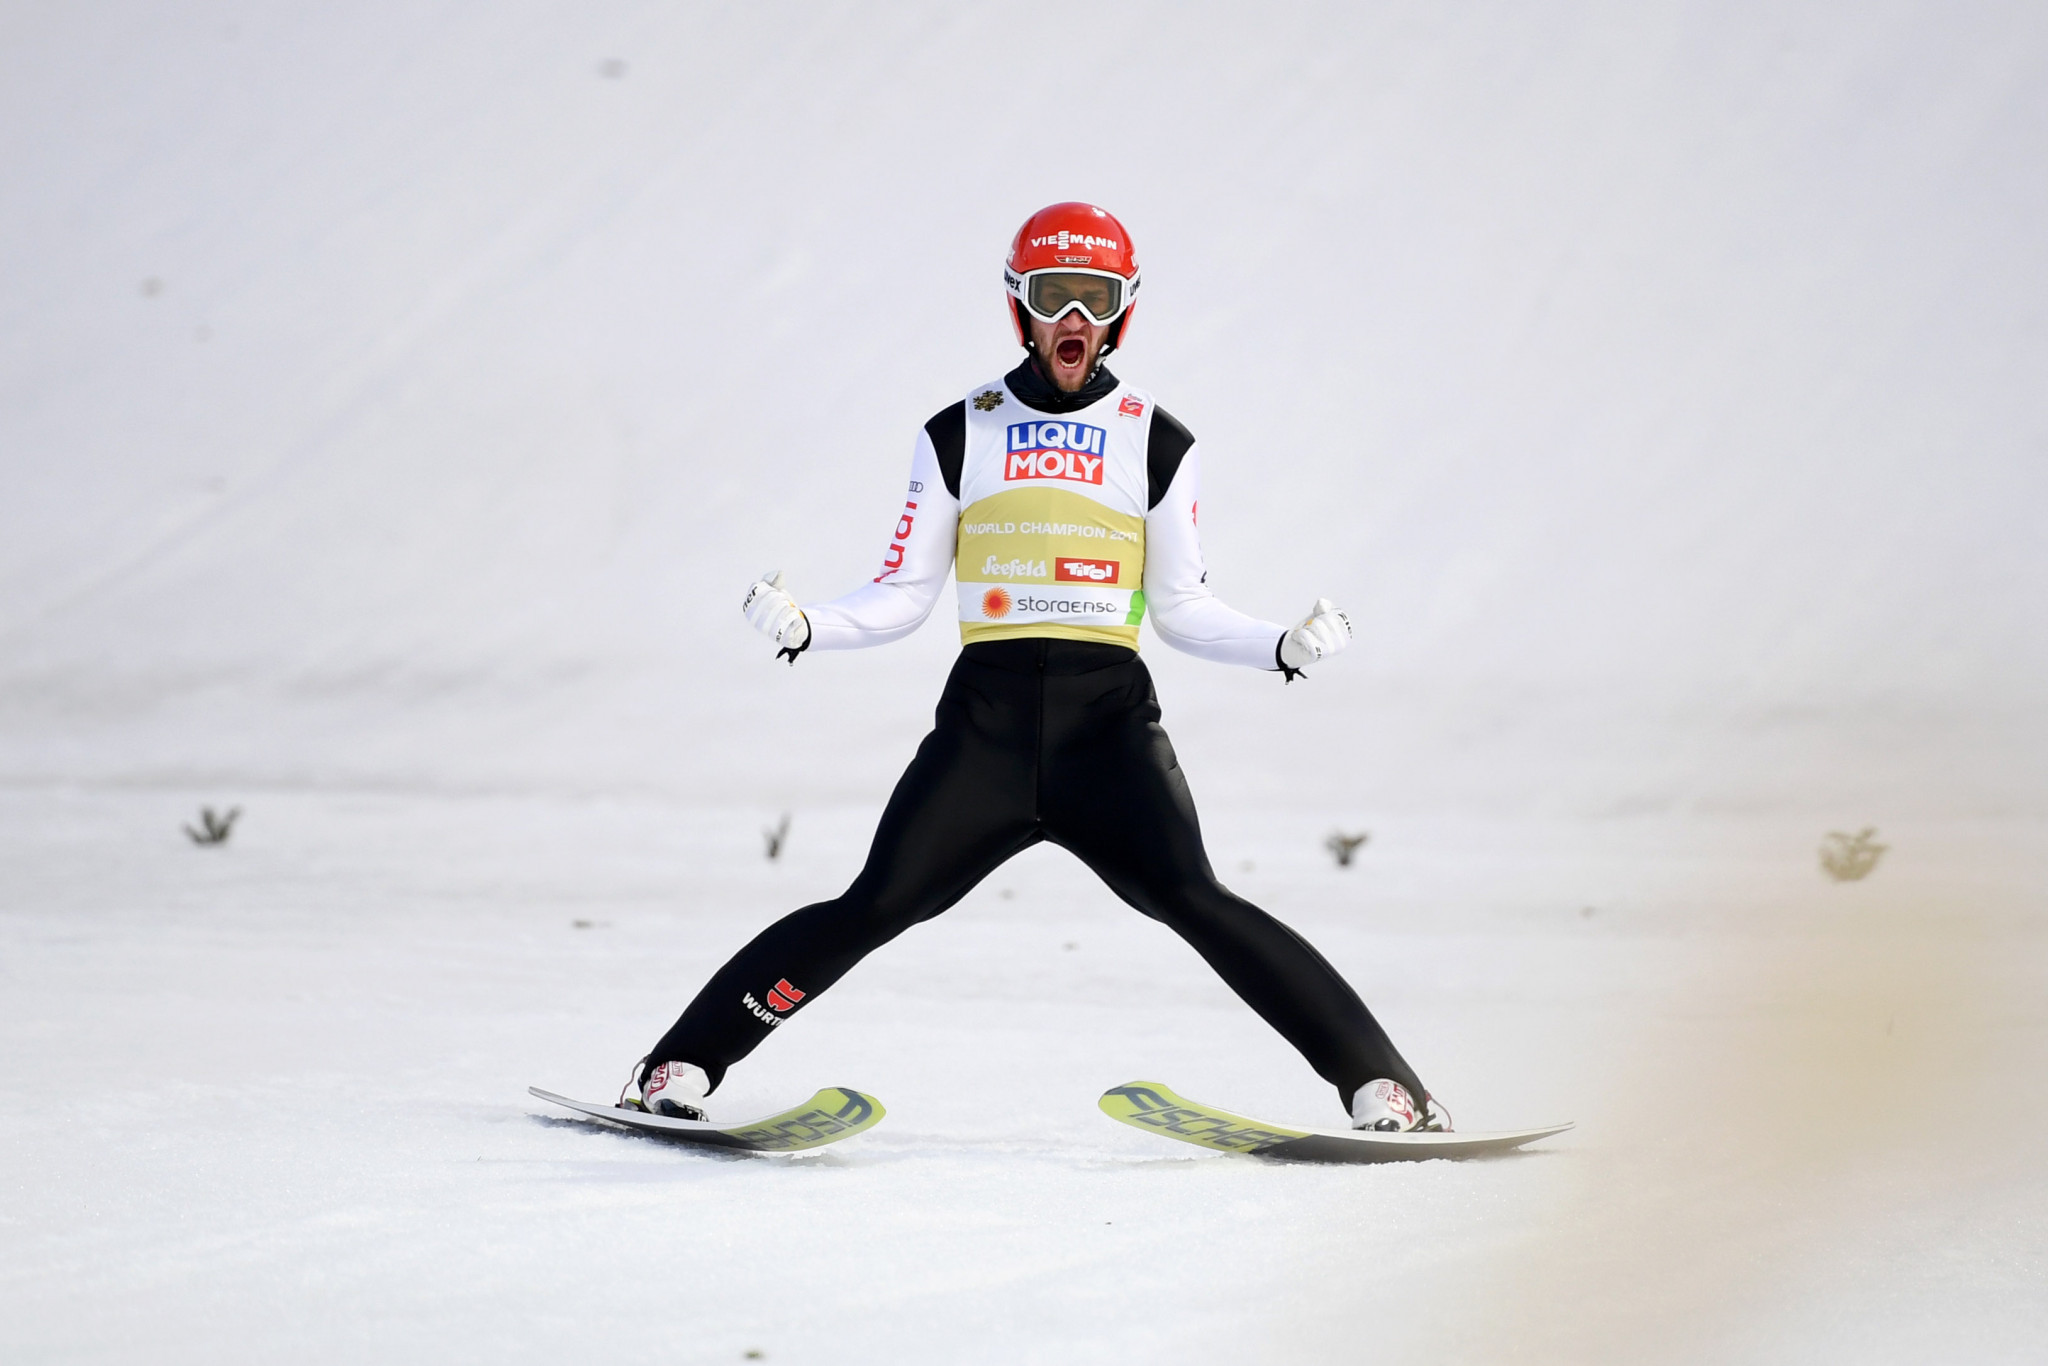 Eisenbichler Makes It Two Wins From Two With Ruka World Cup Triumph